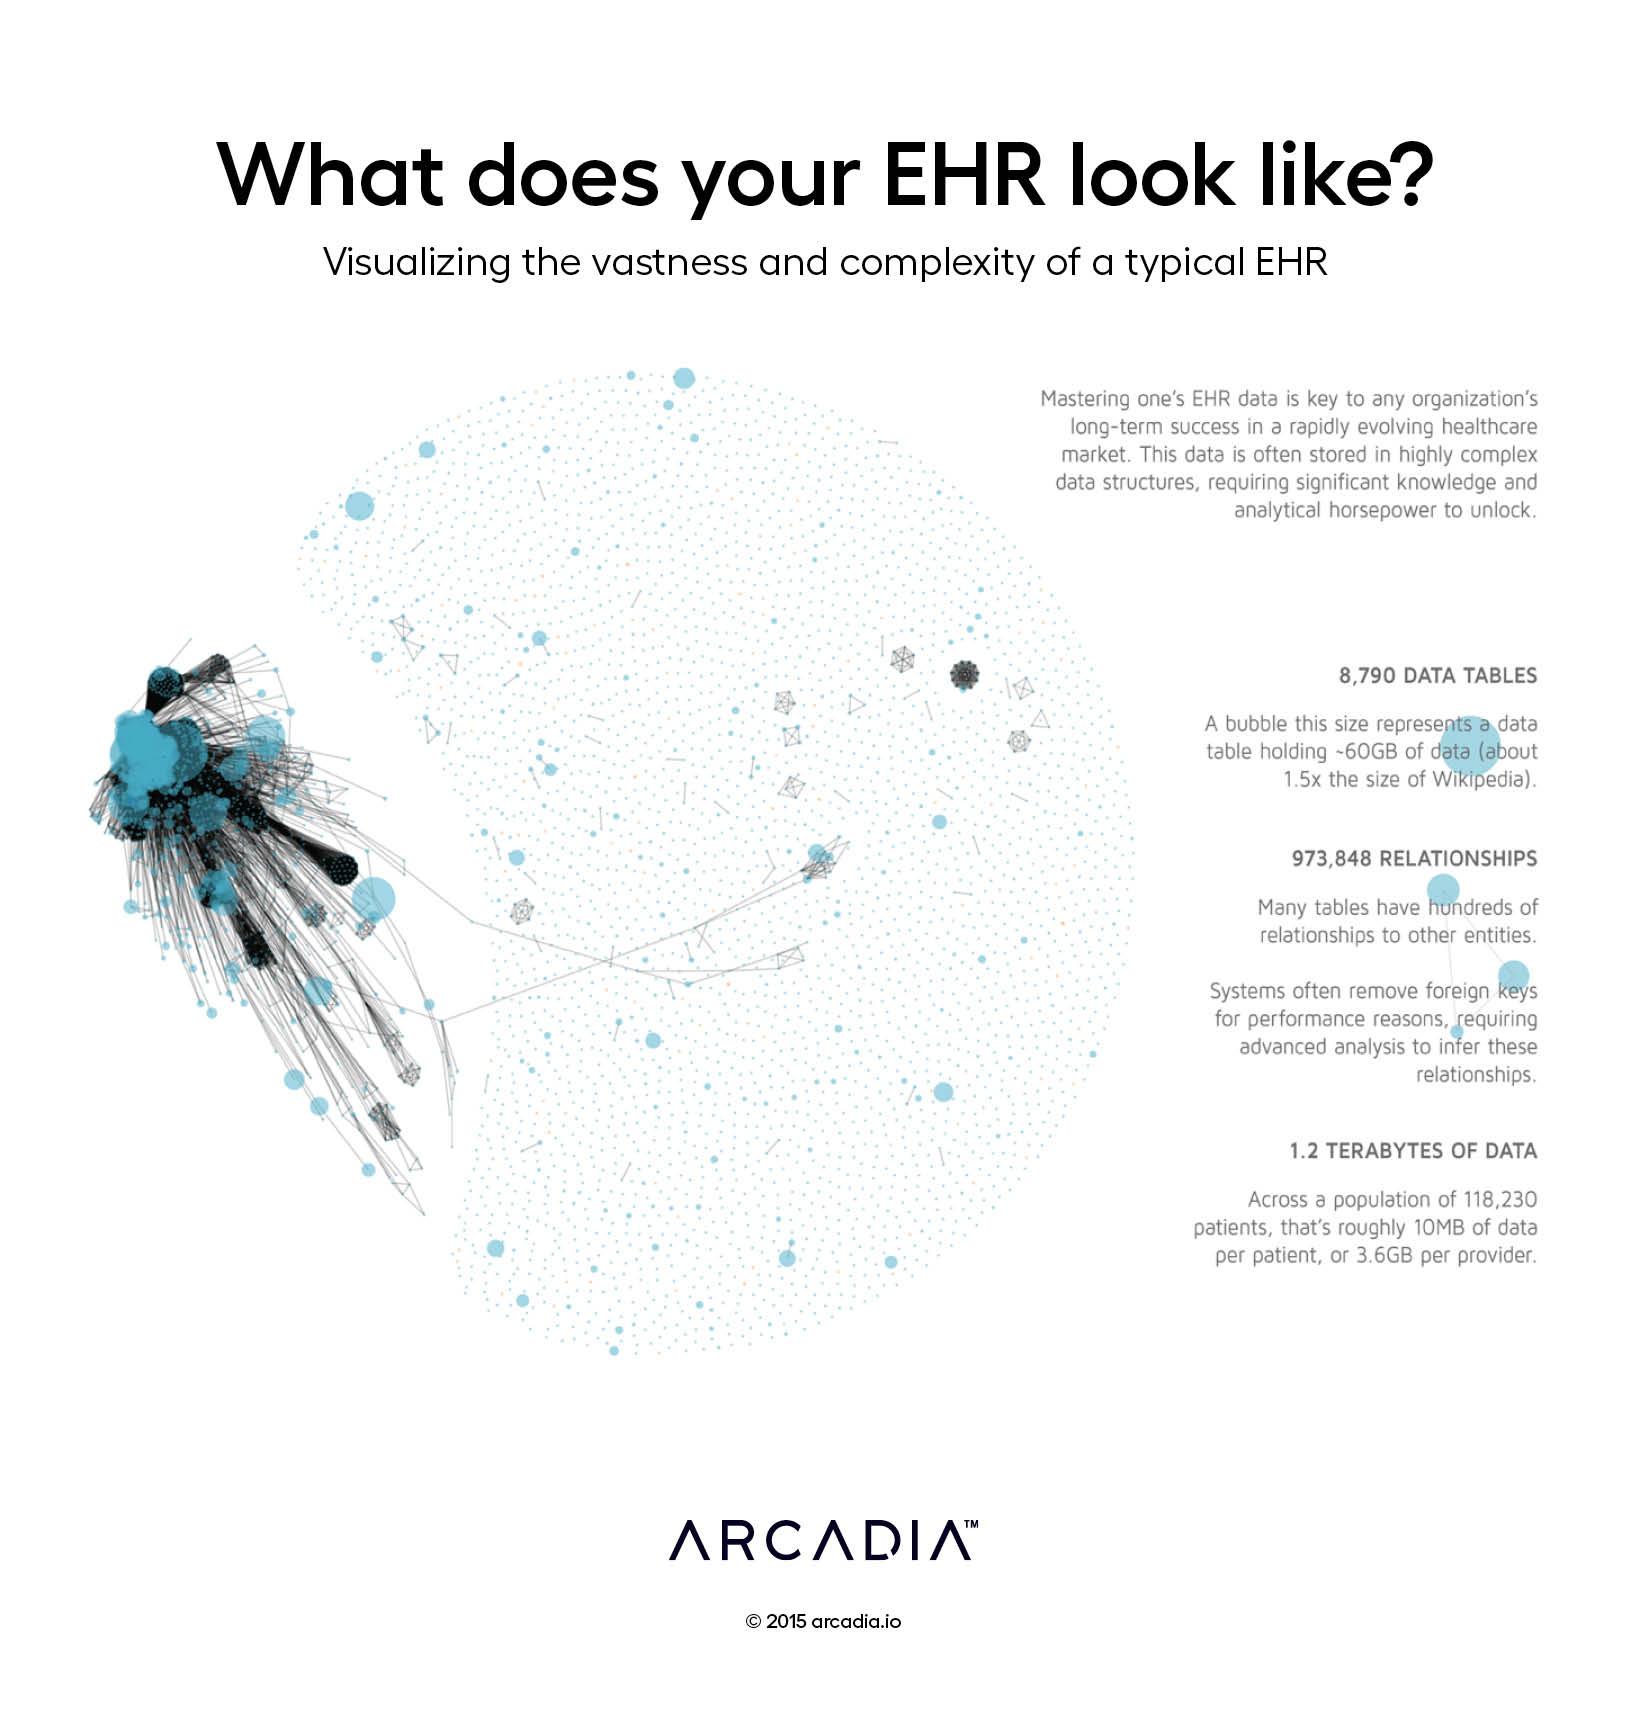 What does your EHR look like?